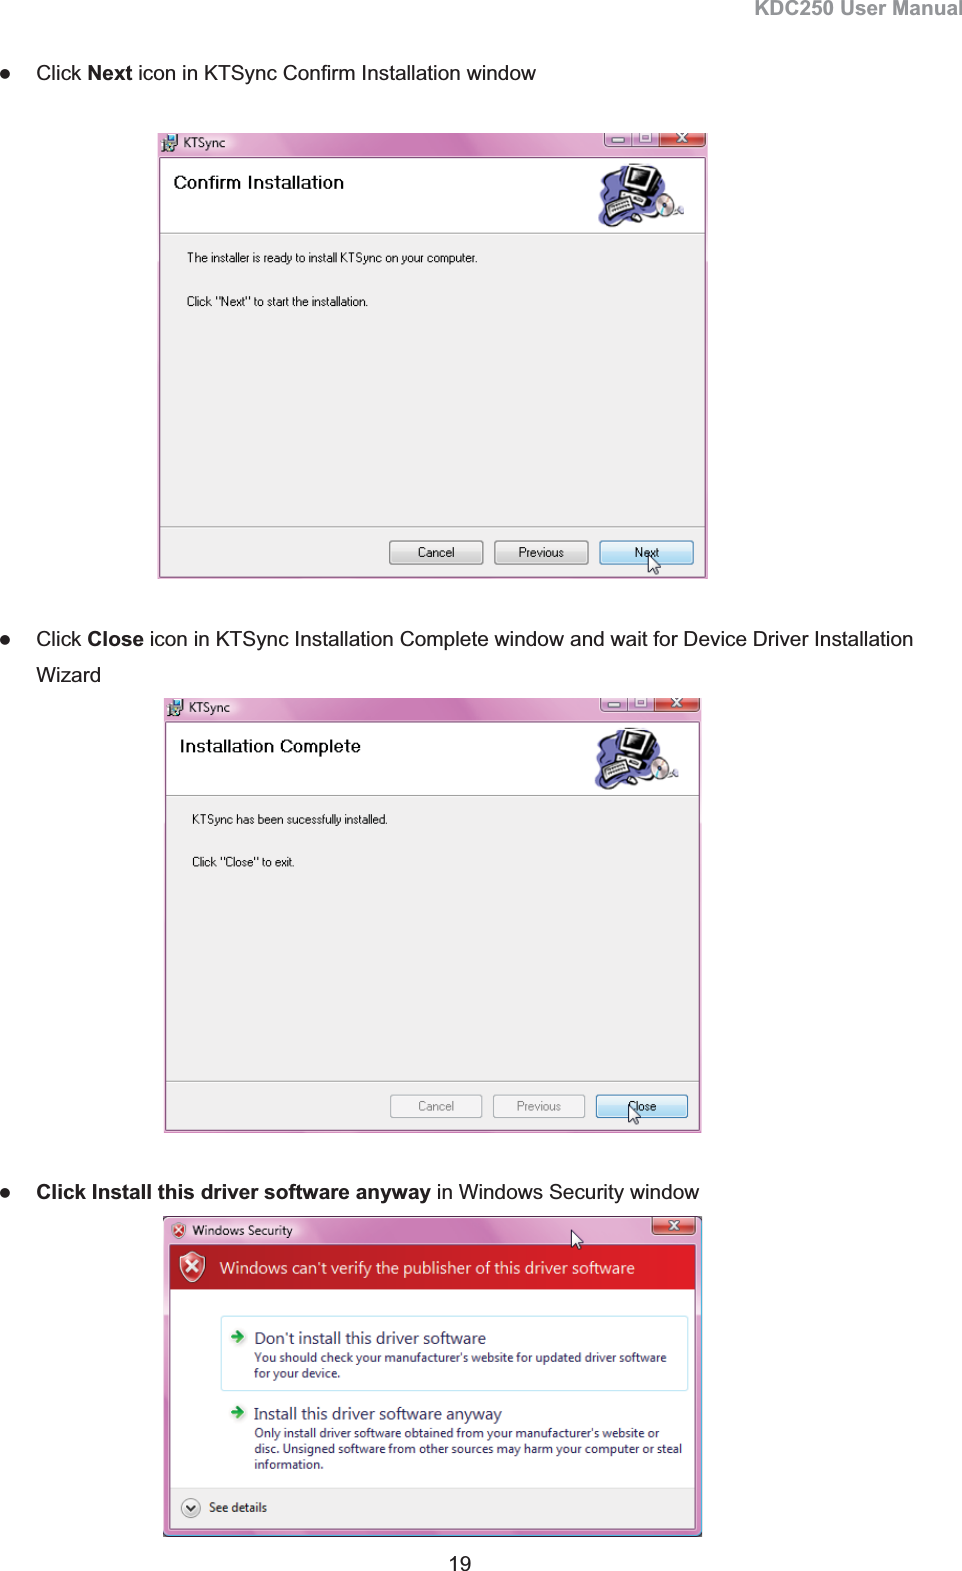 KDC250 User Manual 19 zClick Next icon in KTSync Confirm Installation window zClick Close icon in KTSync Installation Complete window and wait for Device Driver Installation Wizard  zClick Install this driver software anyway in Windows Security window 